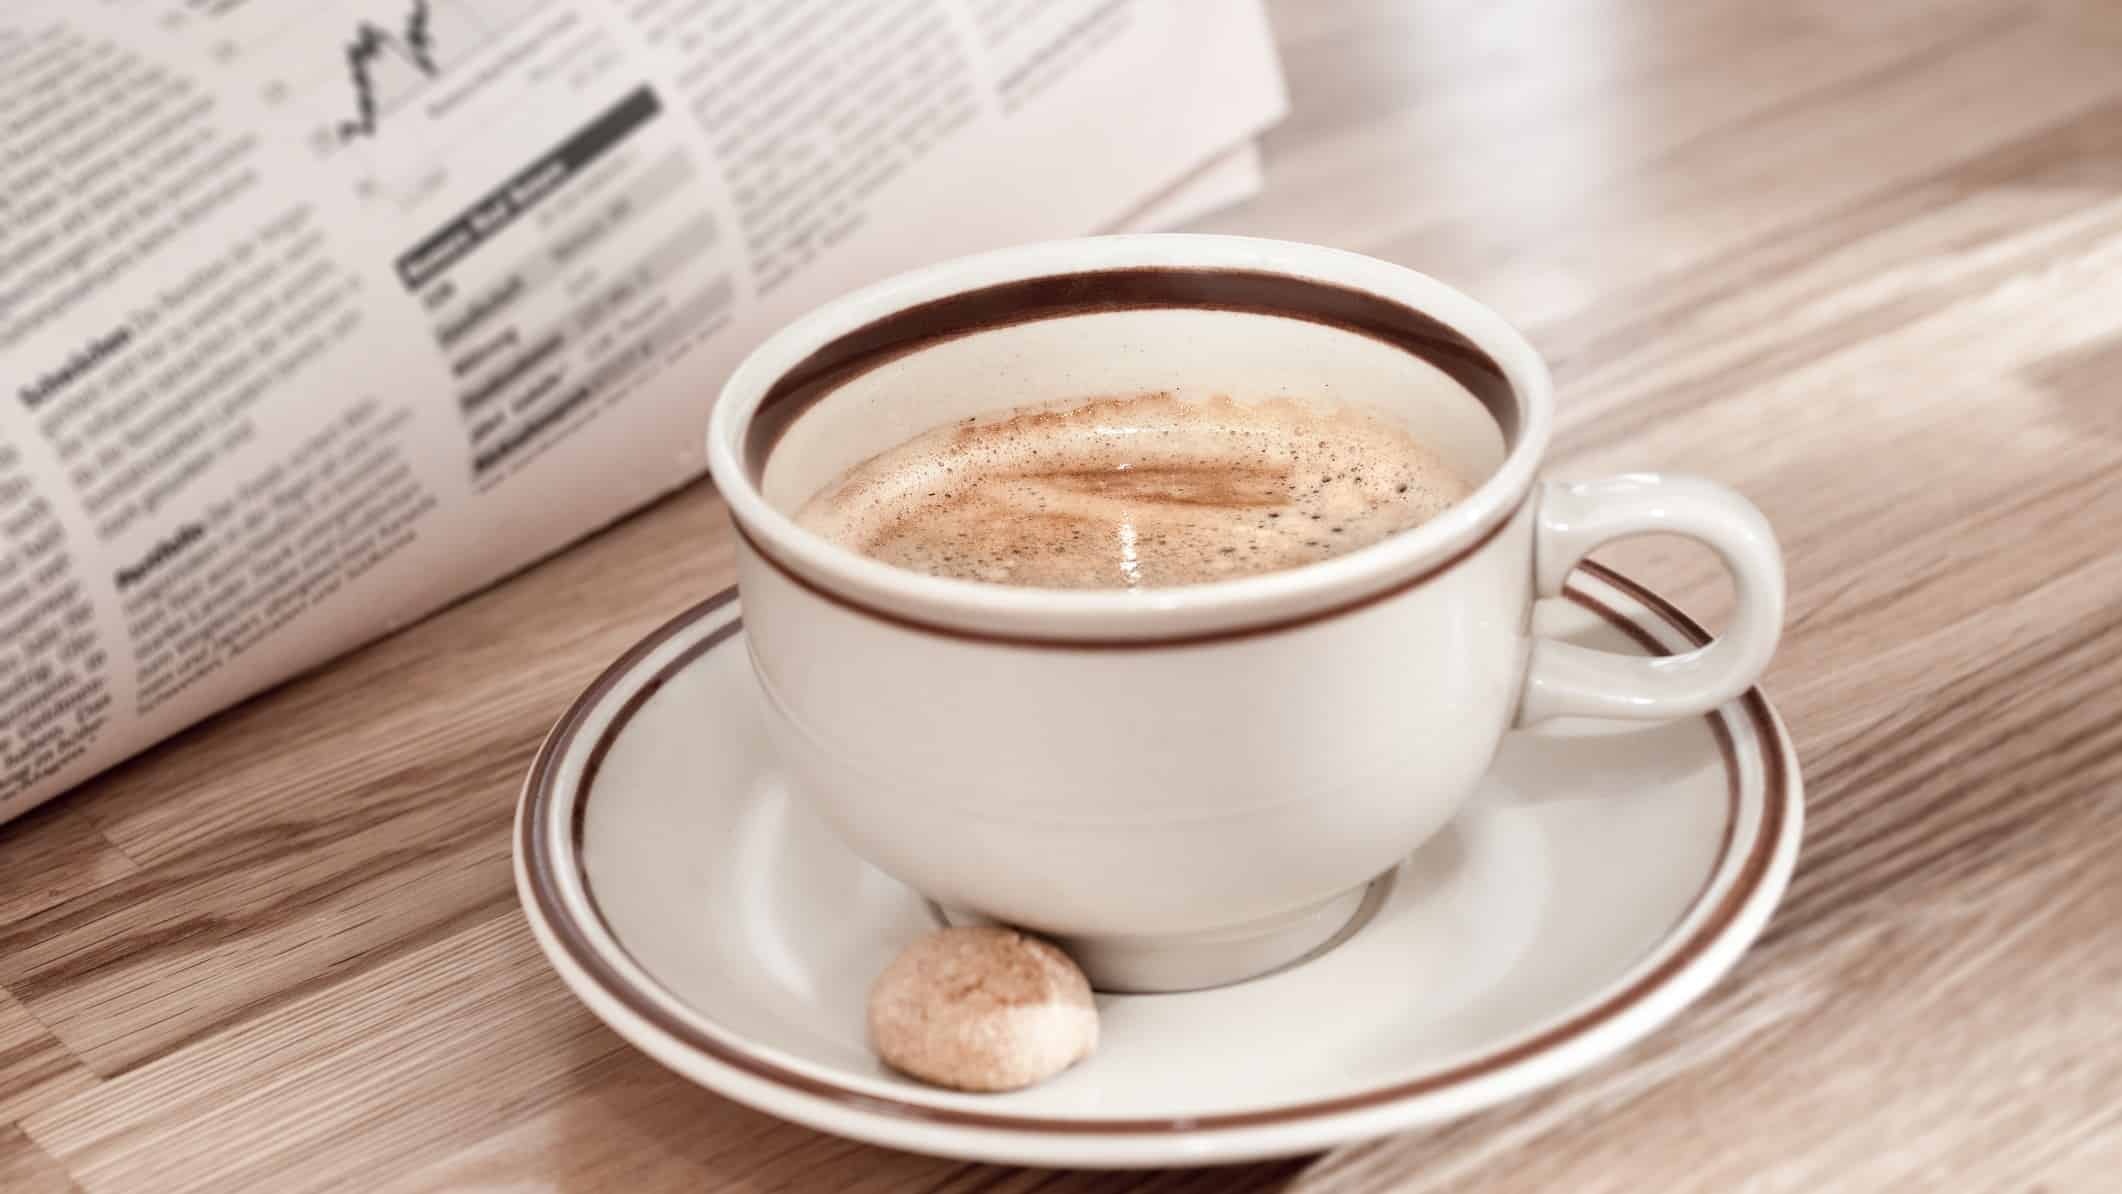 cup of coffee next to newspaper open to stock market page